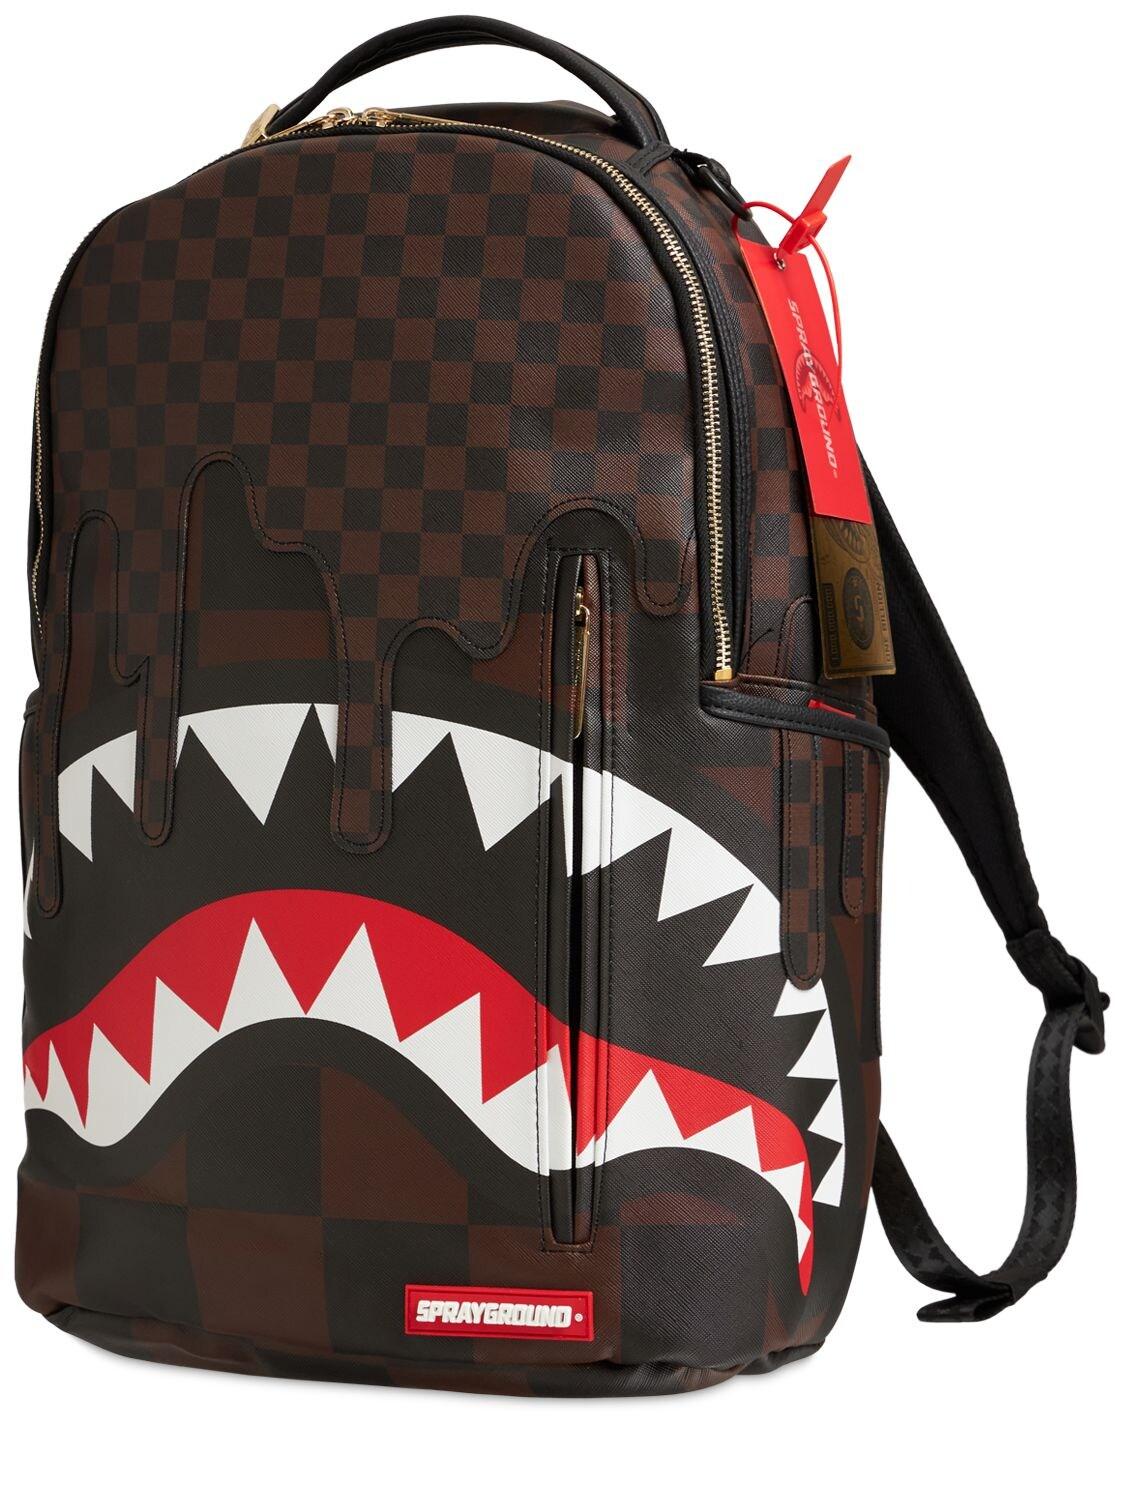 SHARKS IN PARIS THE RIZZ BACKPACK (DLXV)